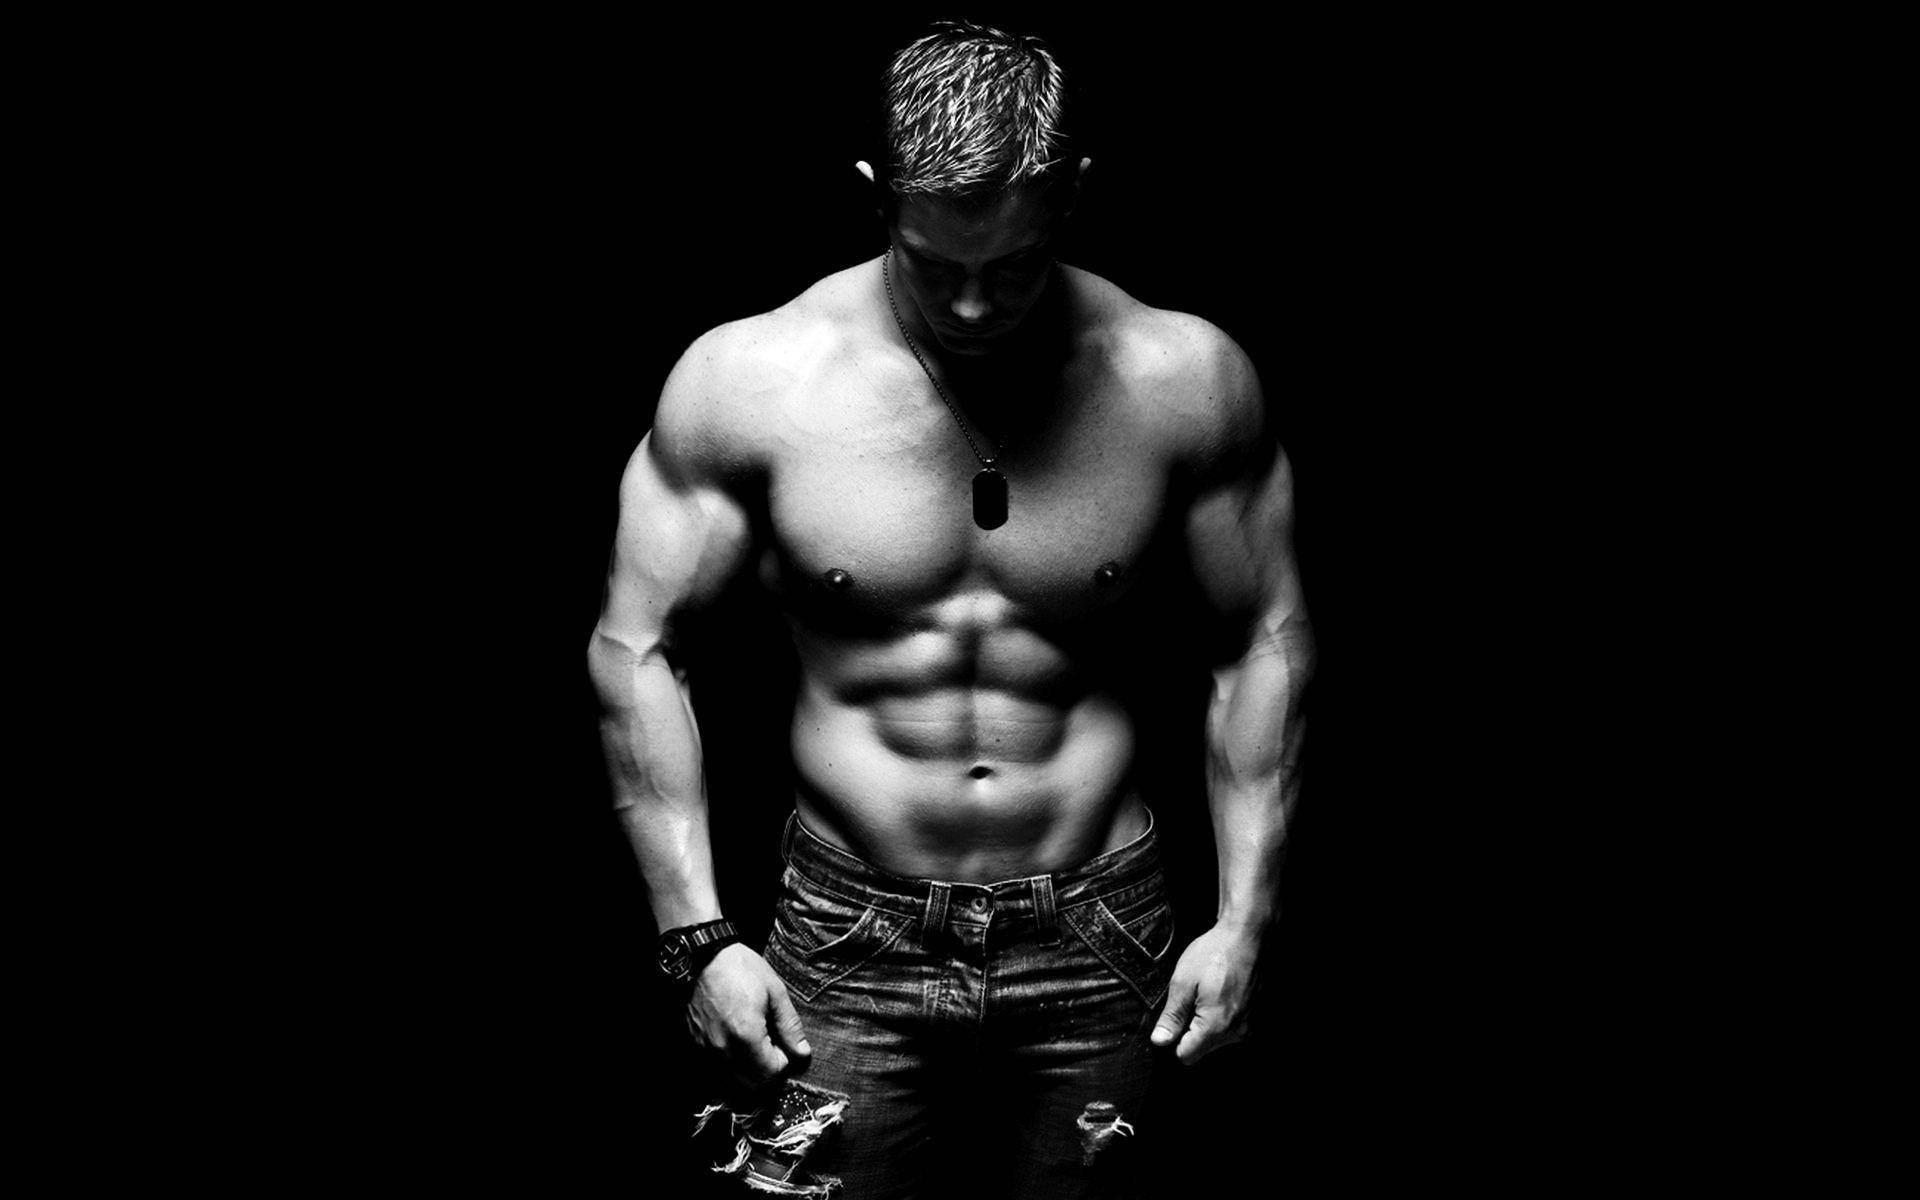 Black And White Photo Of A Shirtless Muscle Man Against A Dark Background